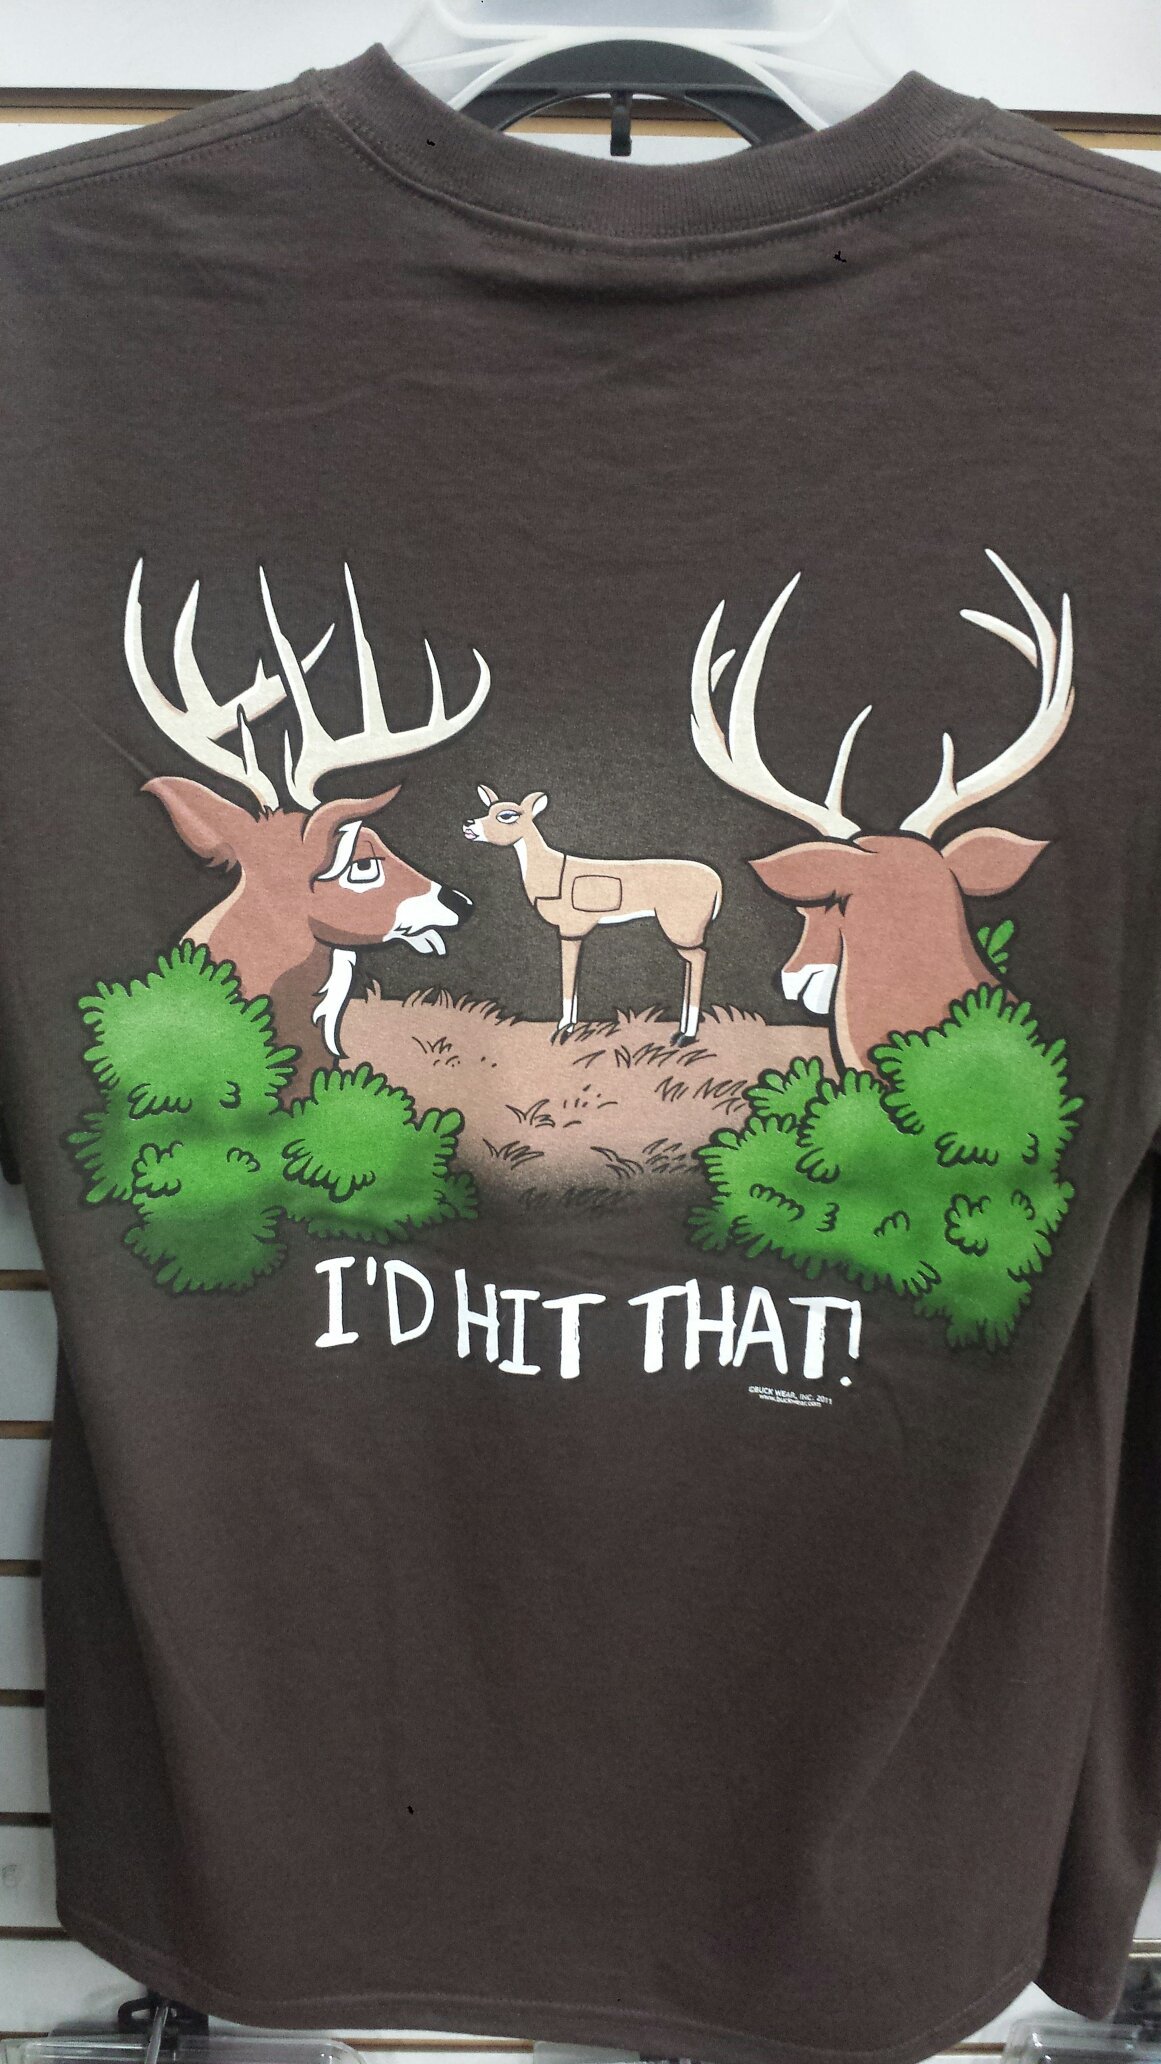 Meanwhile at my local hunting store - meme